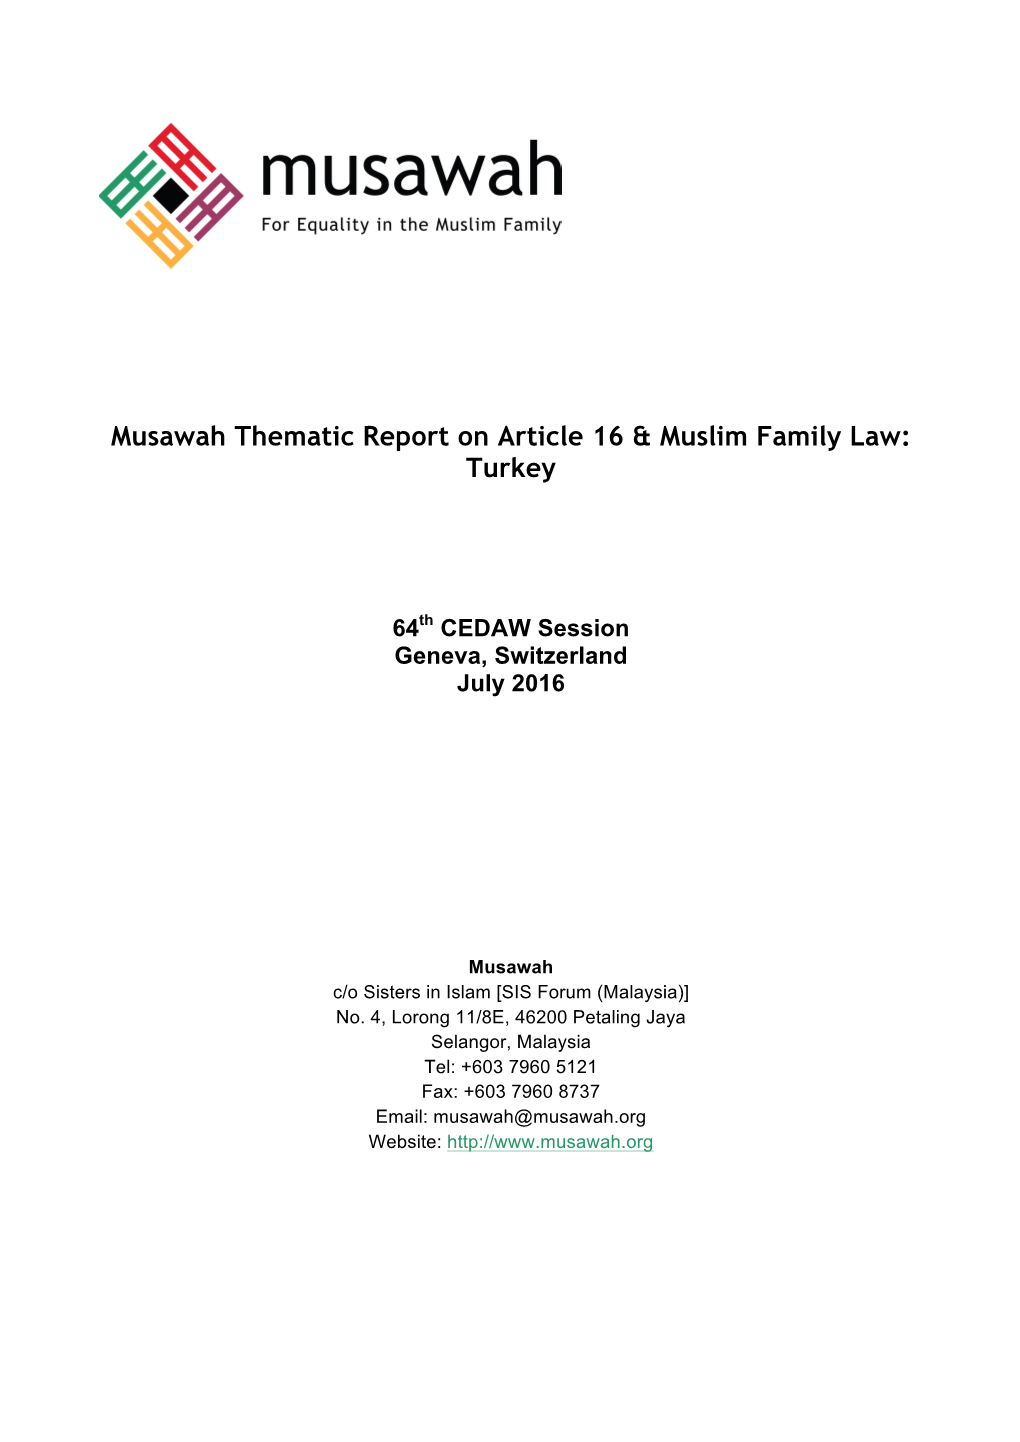 Musawah Thematic Report on Article 16 & Muslim Family Law: Turkey